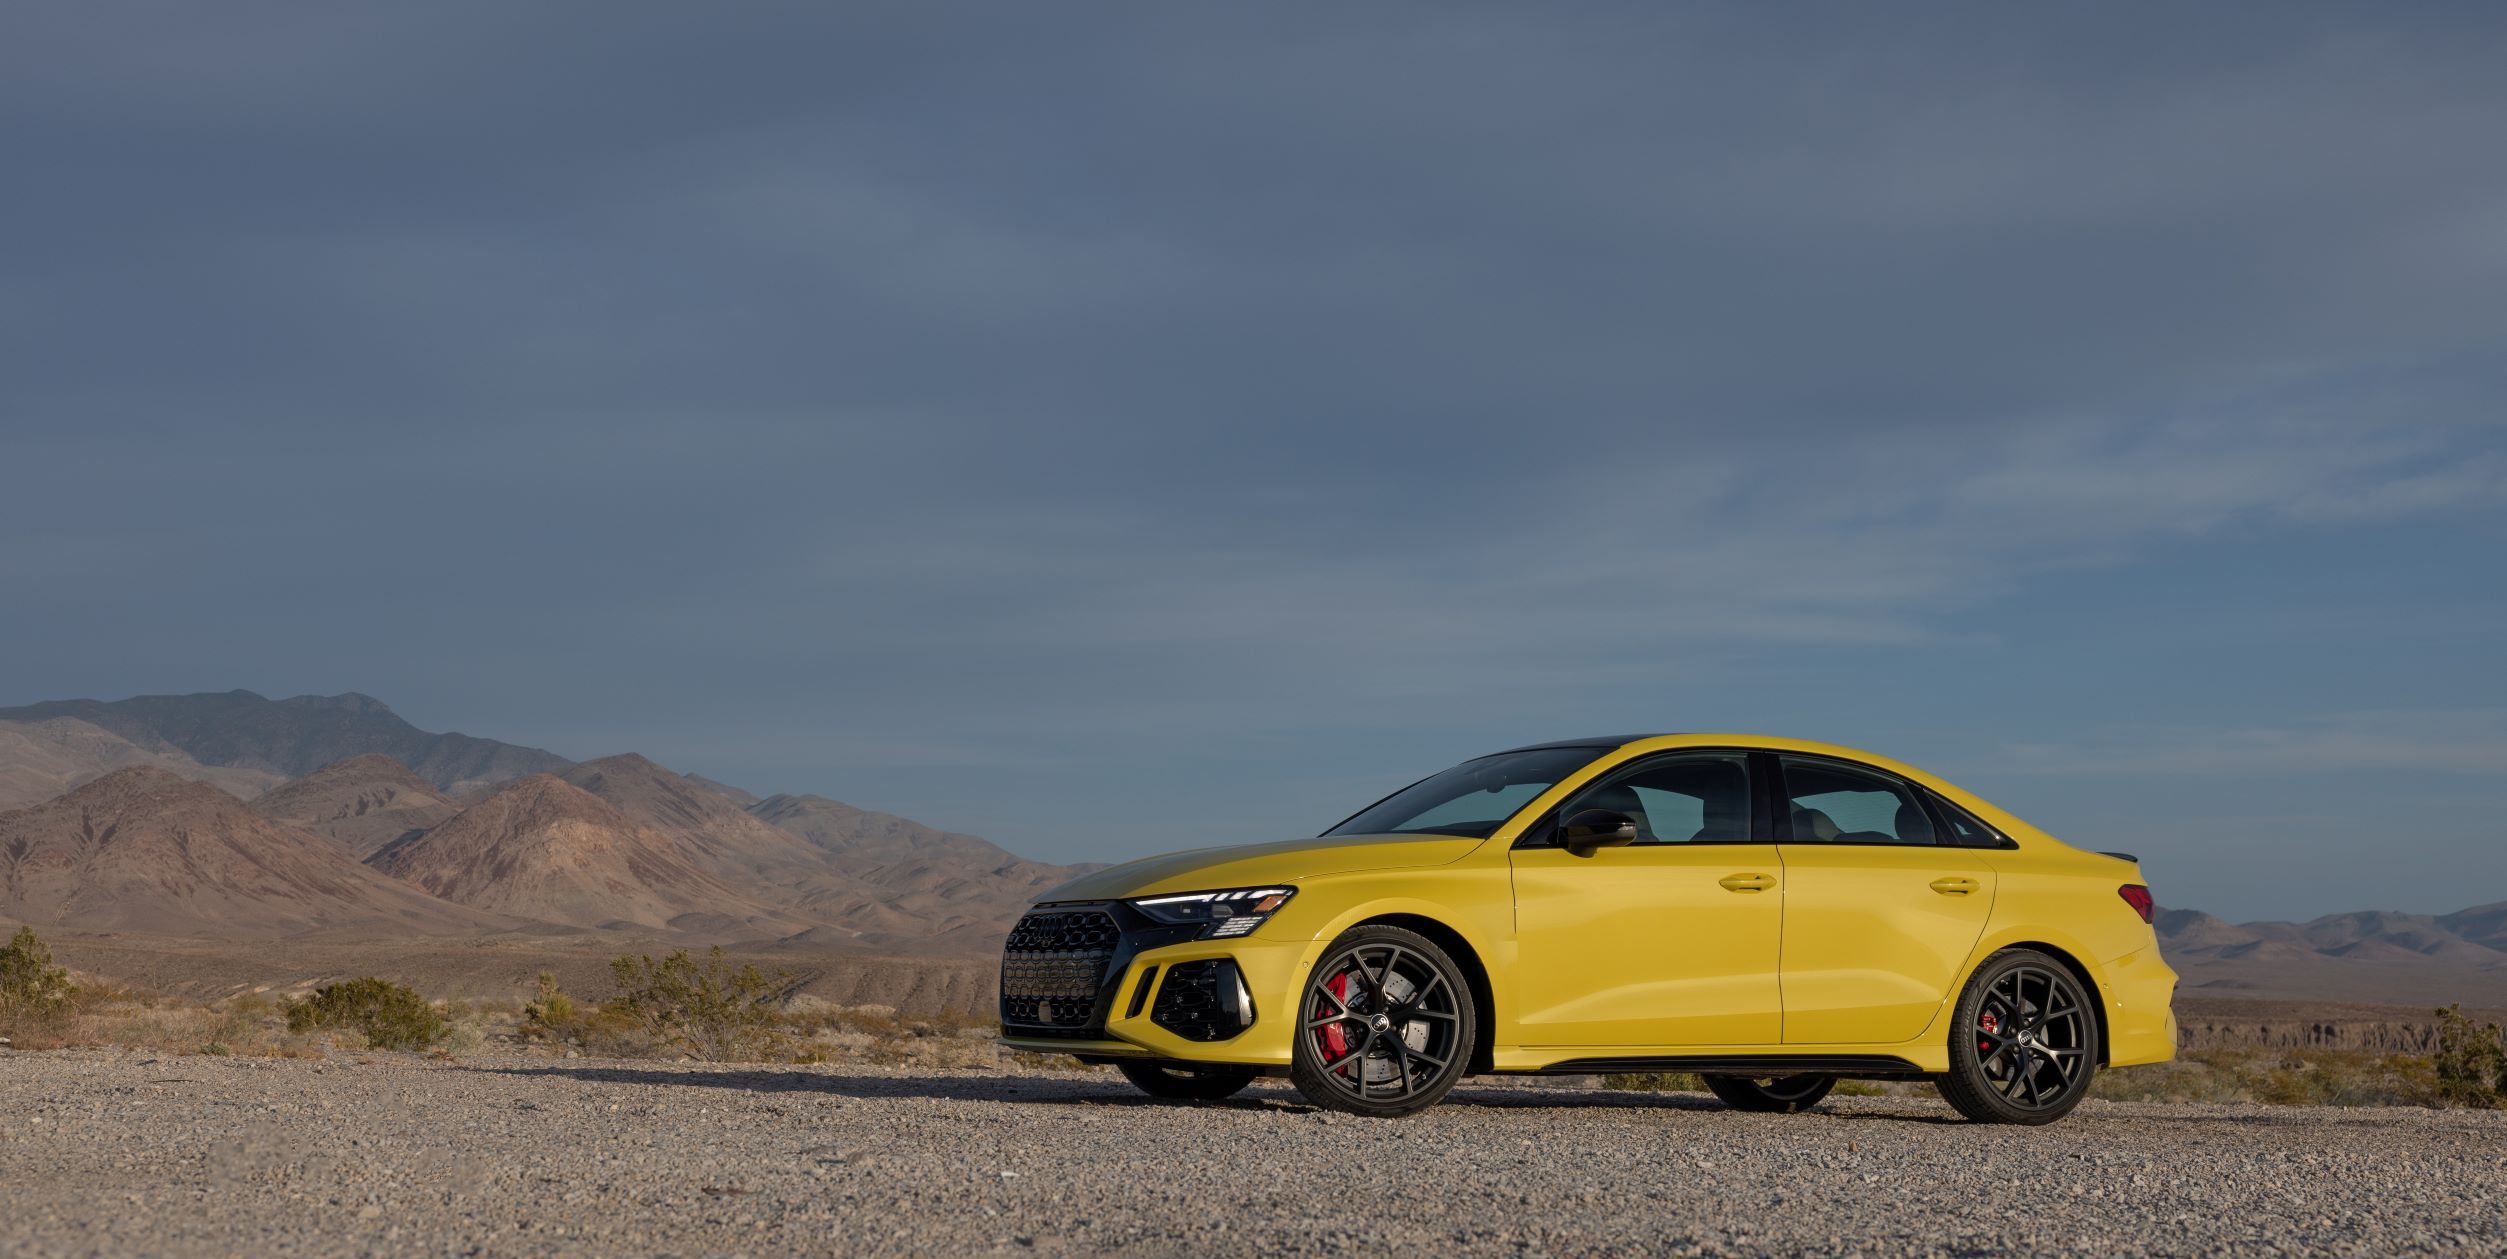 The Audi RS3 Is the Compact Performance Car for the Irrational